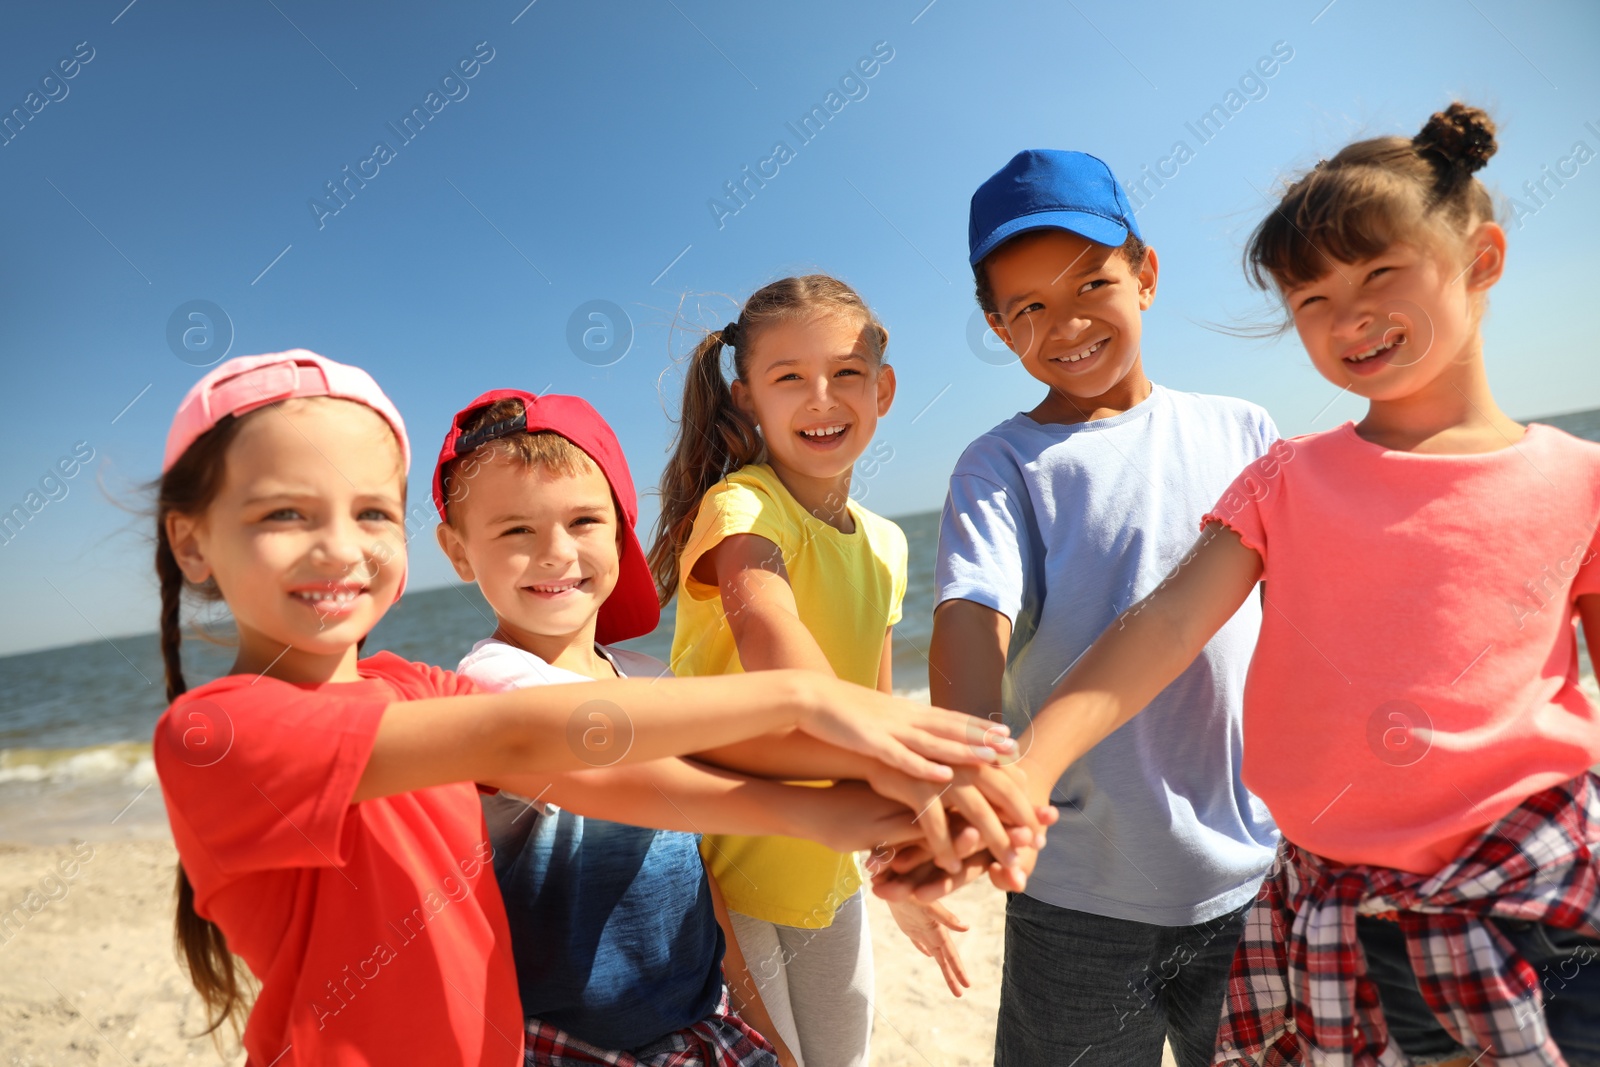 Photo of Group of children putting hands together at sea beach on sunny day. Summer camp